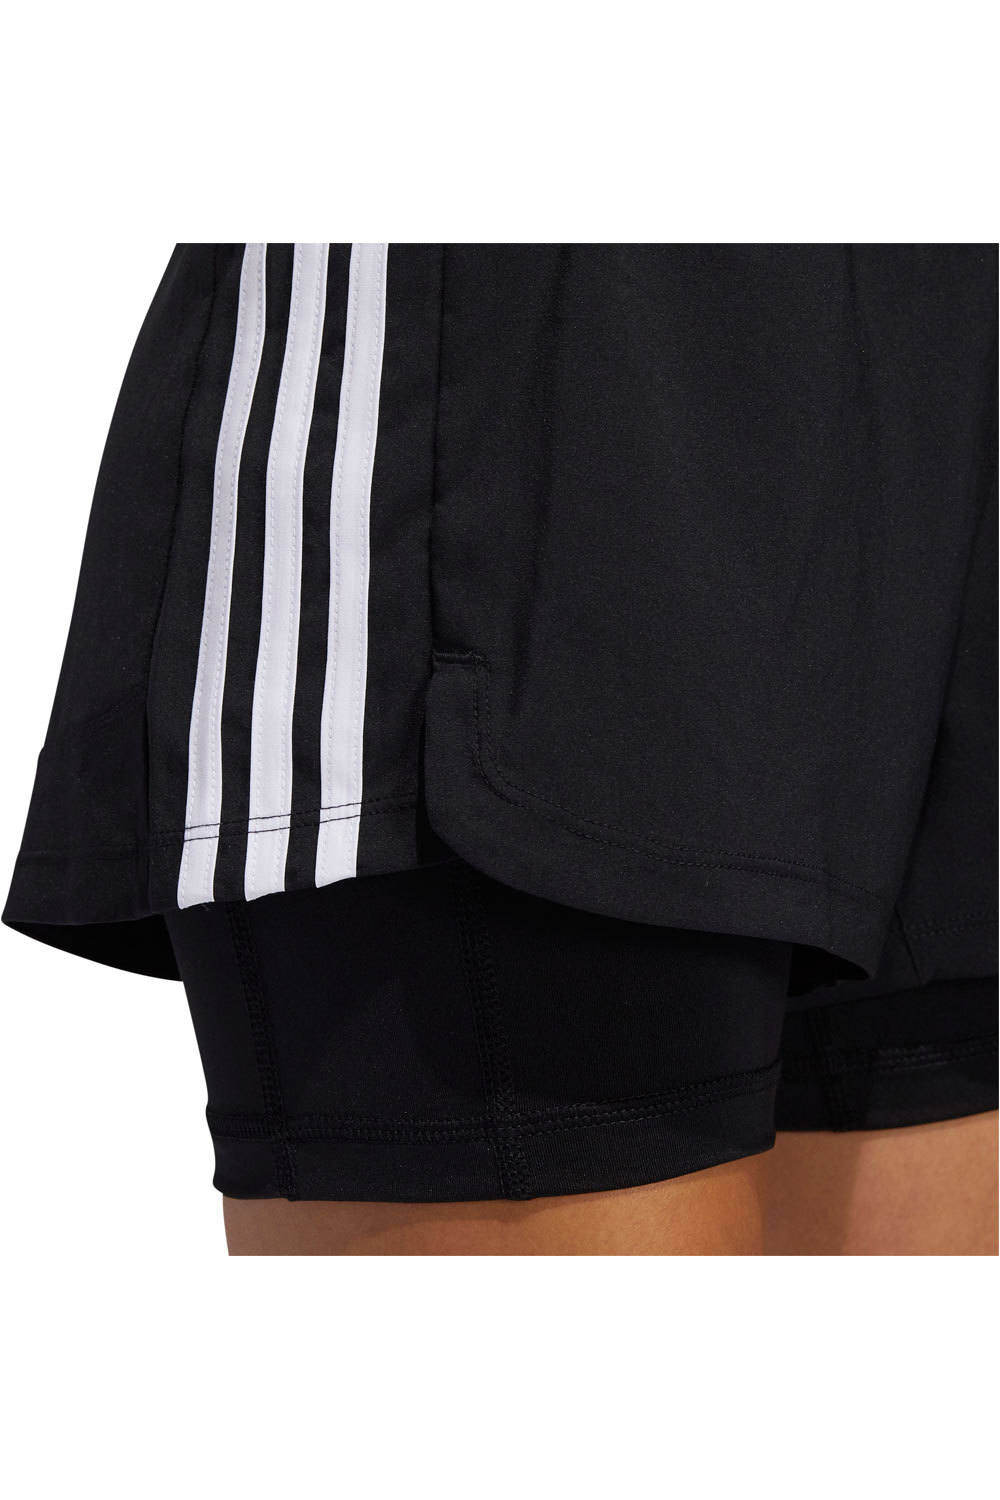 adidas pantalones y mallas cortas fitness mujer Pacer Woven Two-in-One 3 bandas 03